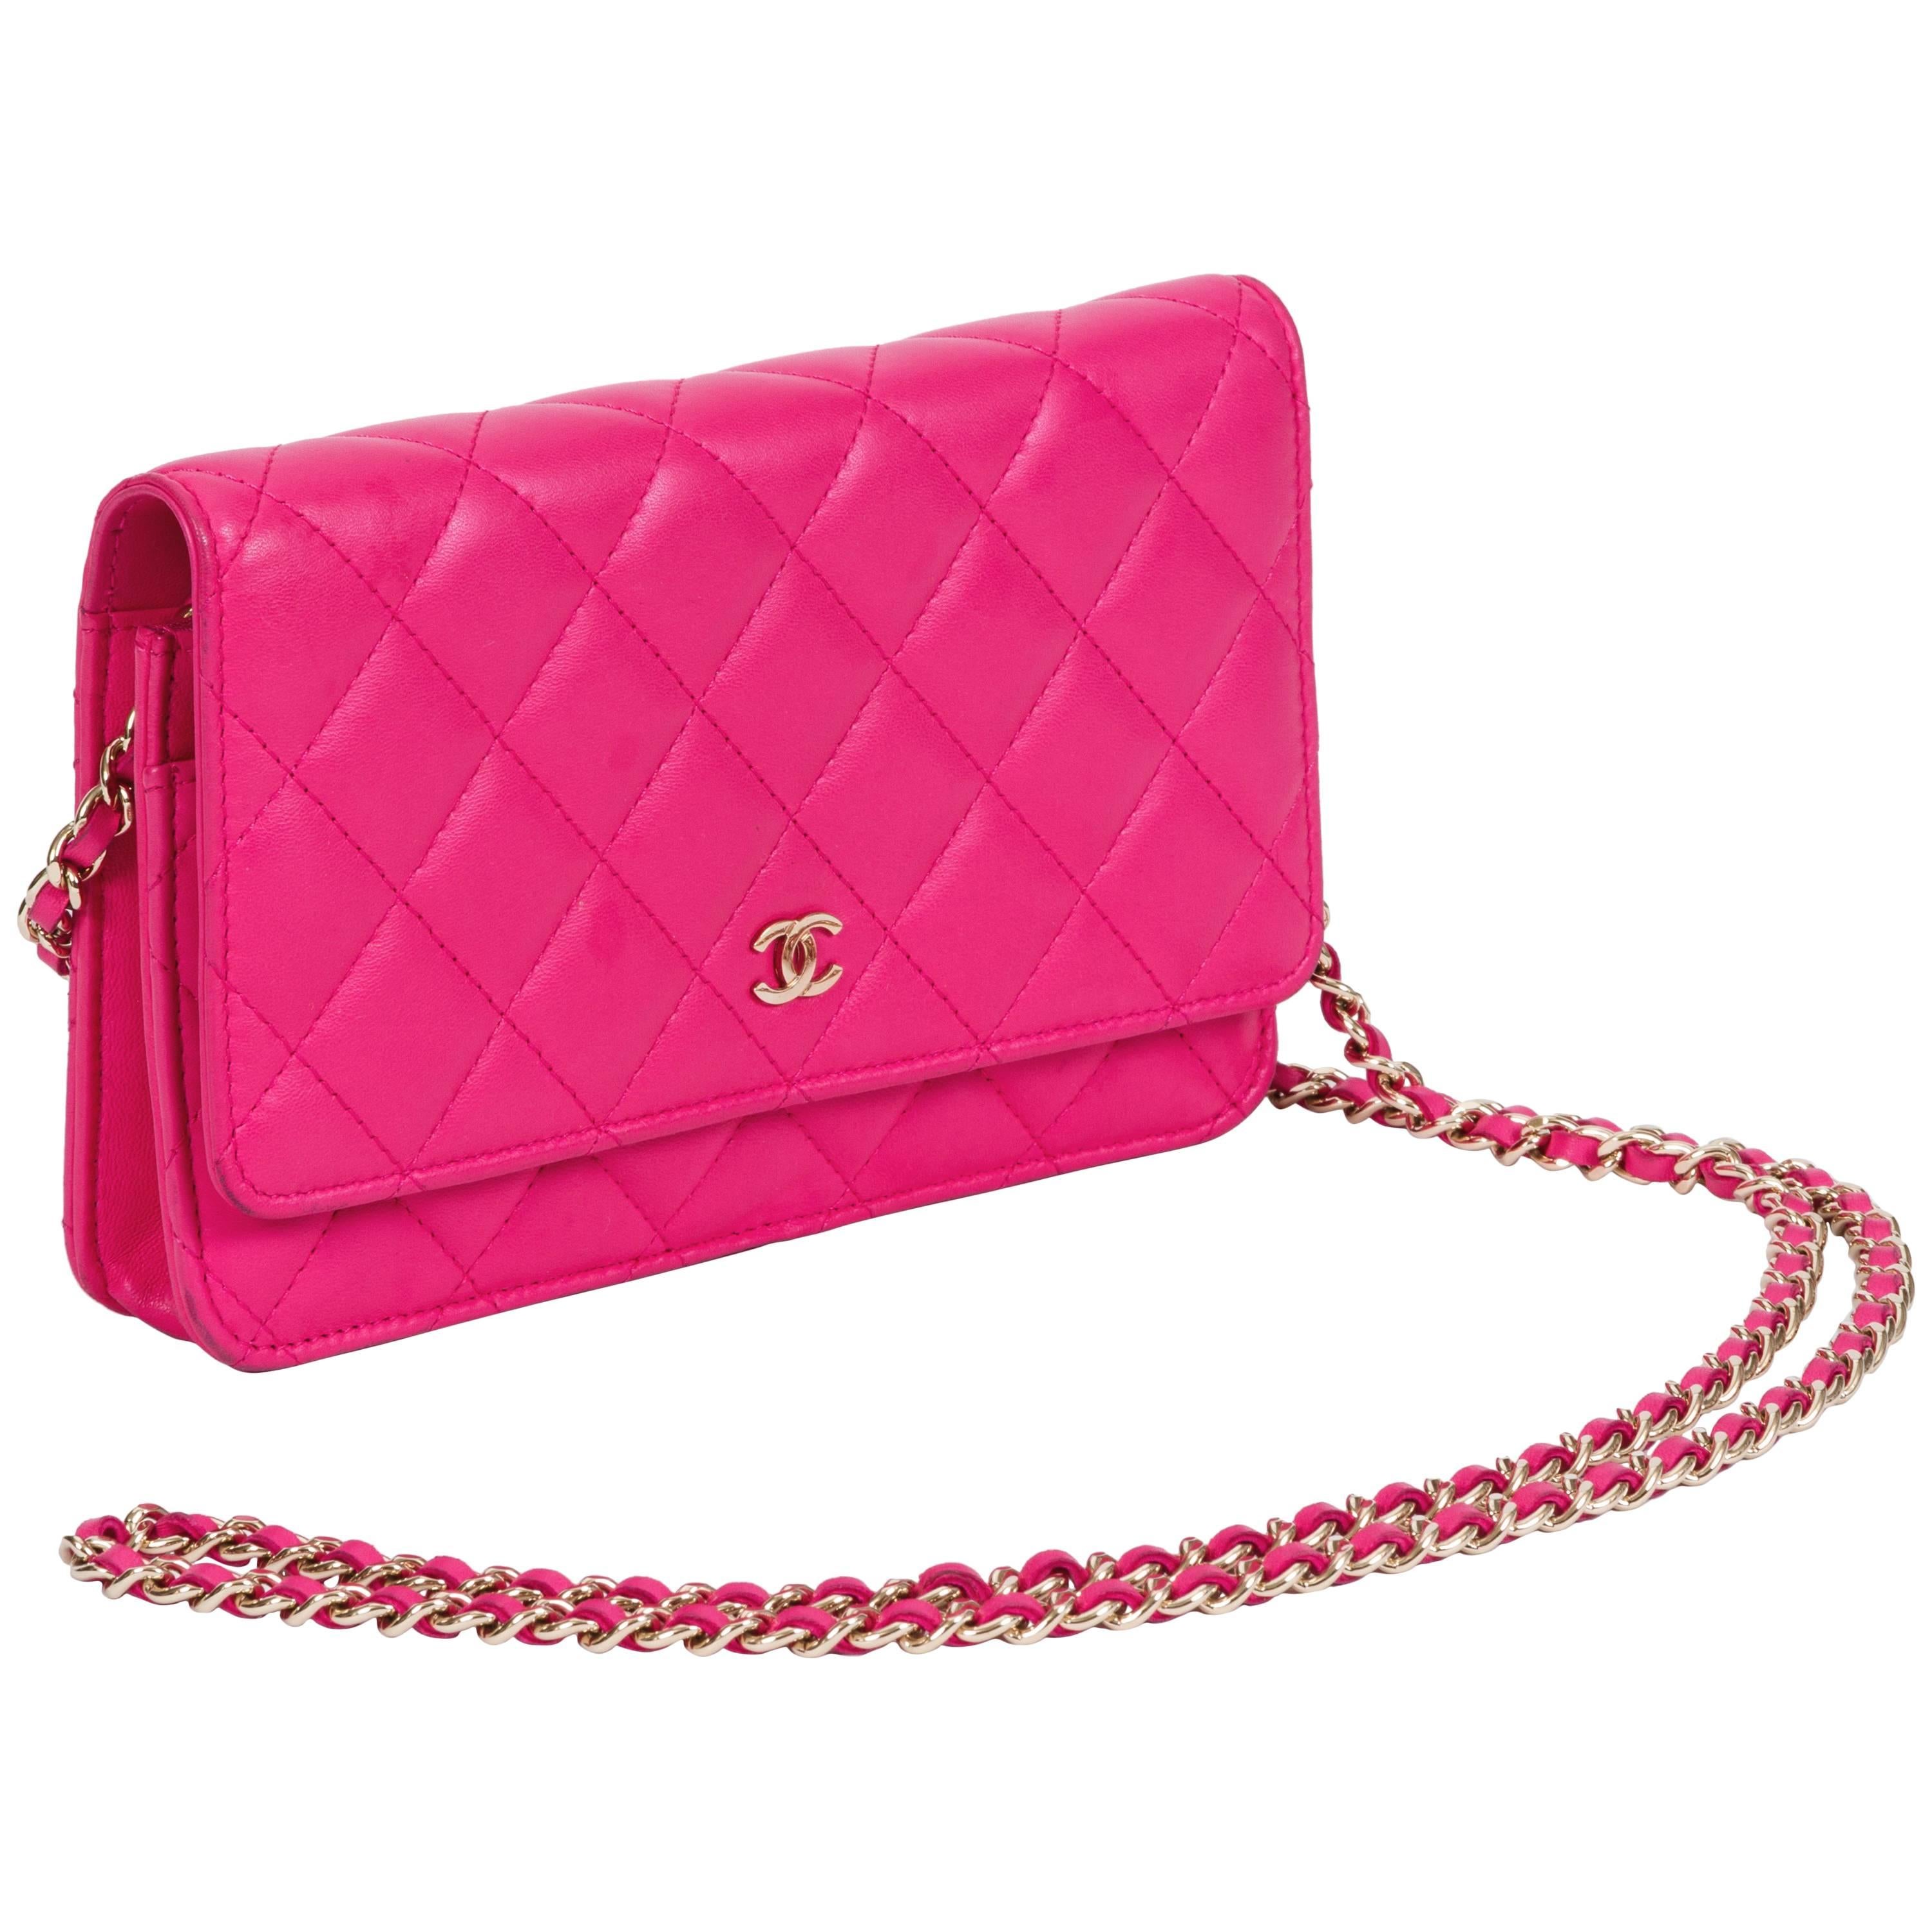 Chanel Fushia Quilted Wallet on a Chain Cross Body Bag